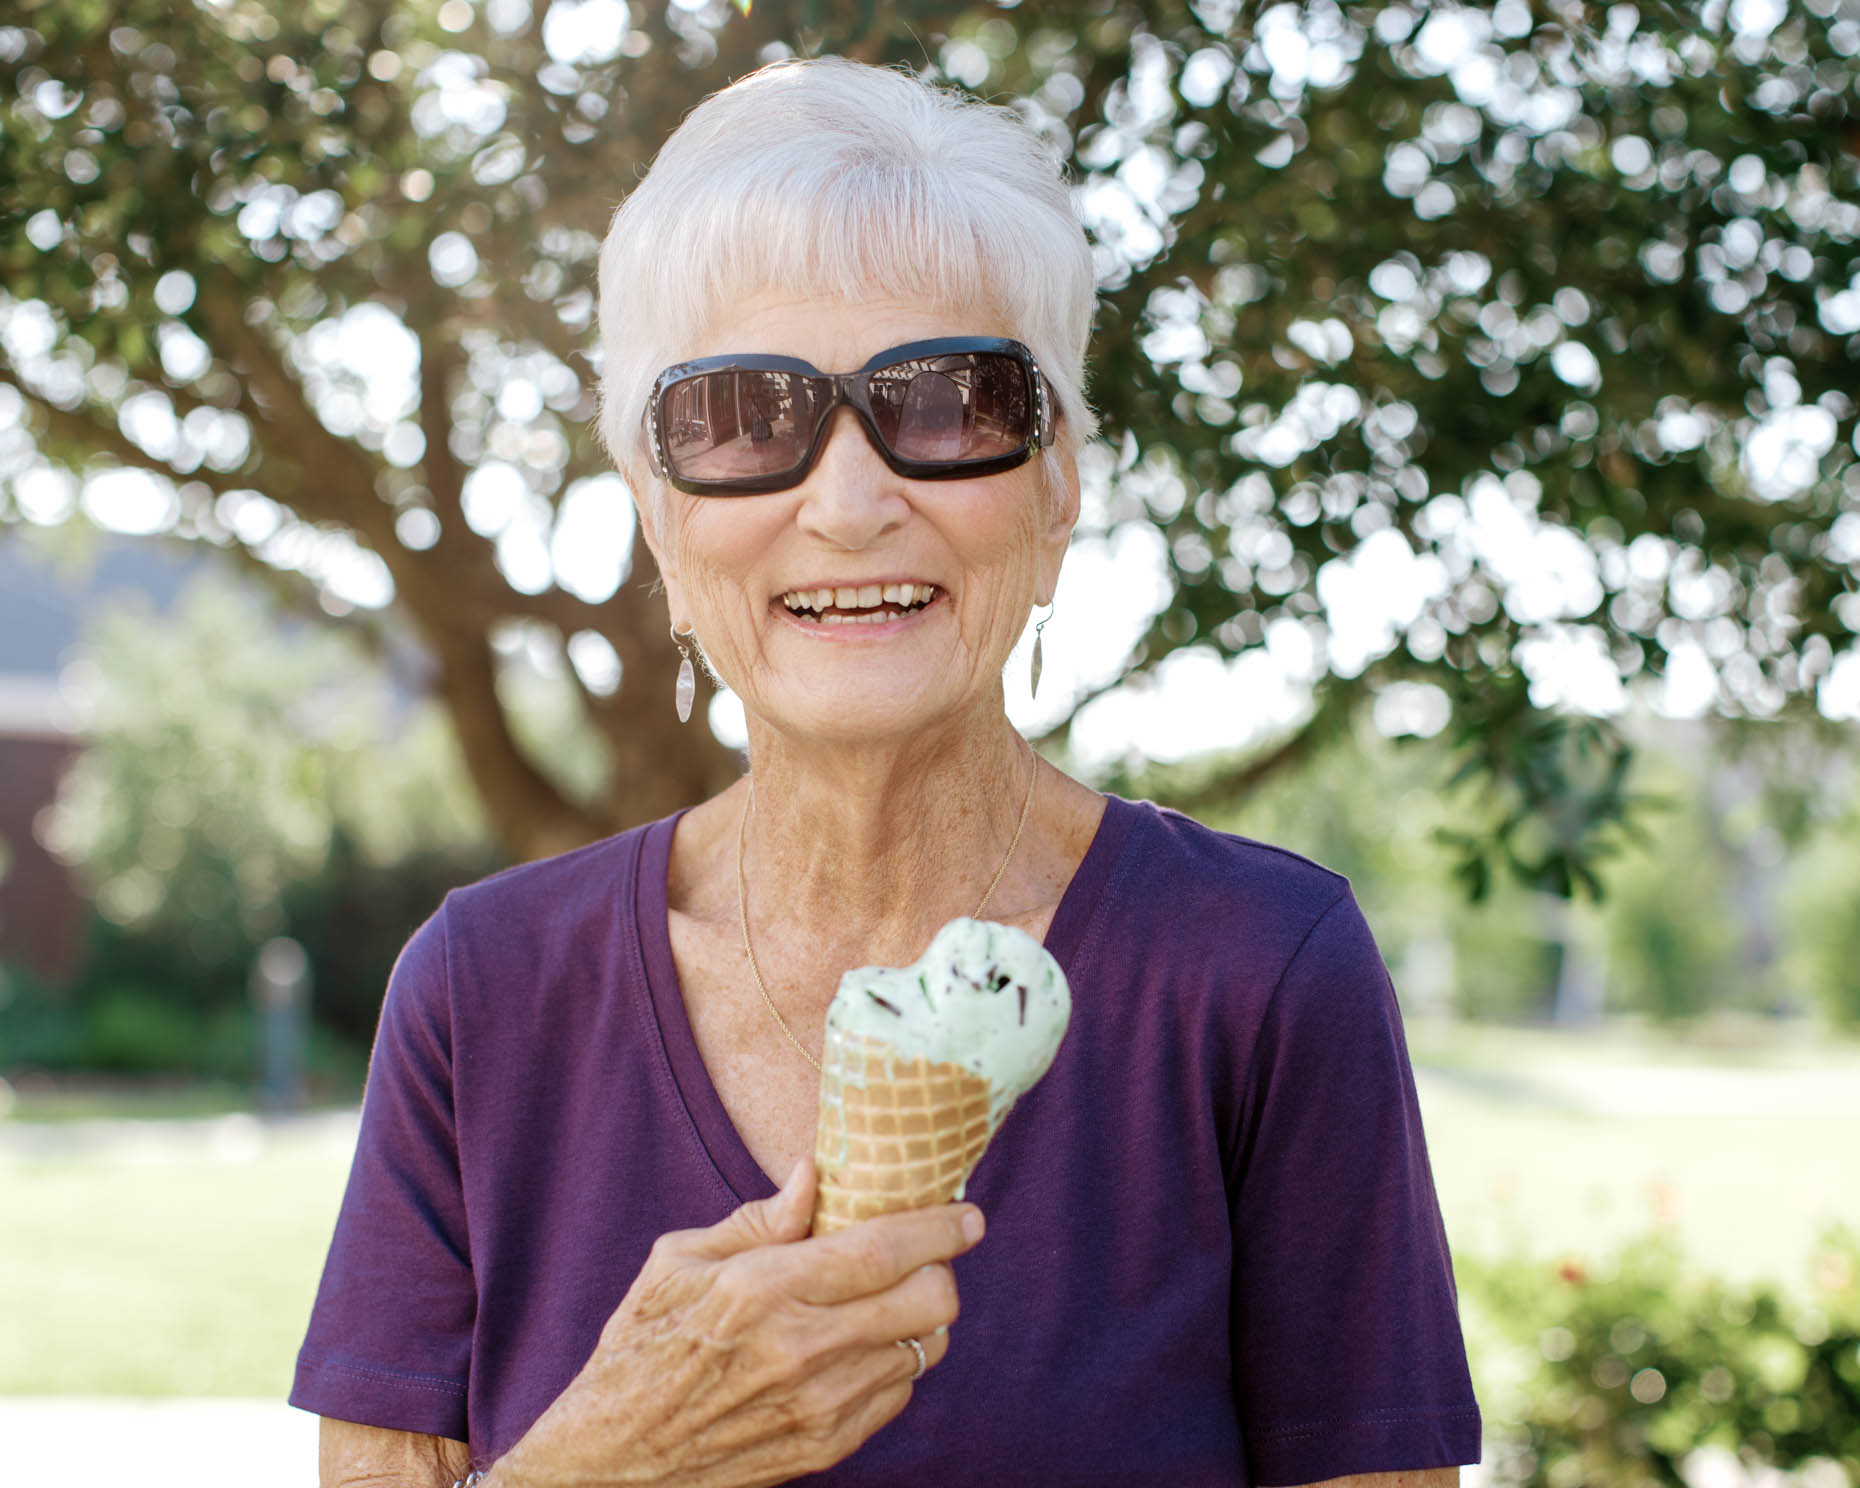 Retired woman in sunglasses eating ice cream cone outdoors at a senior living community